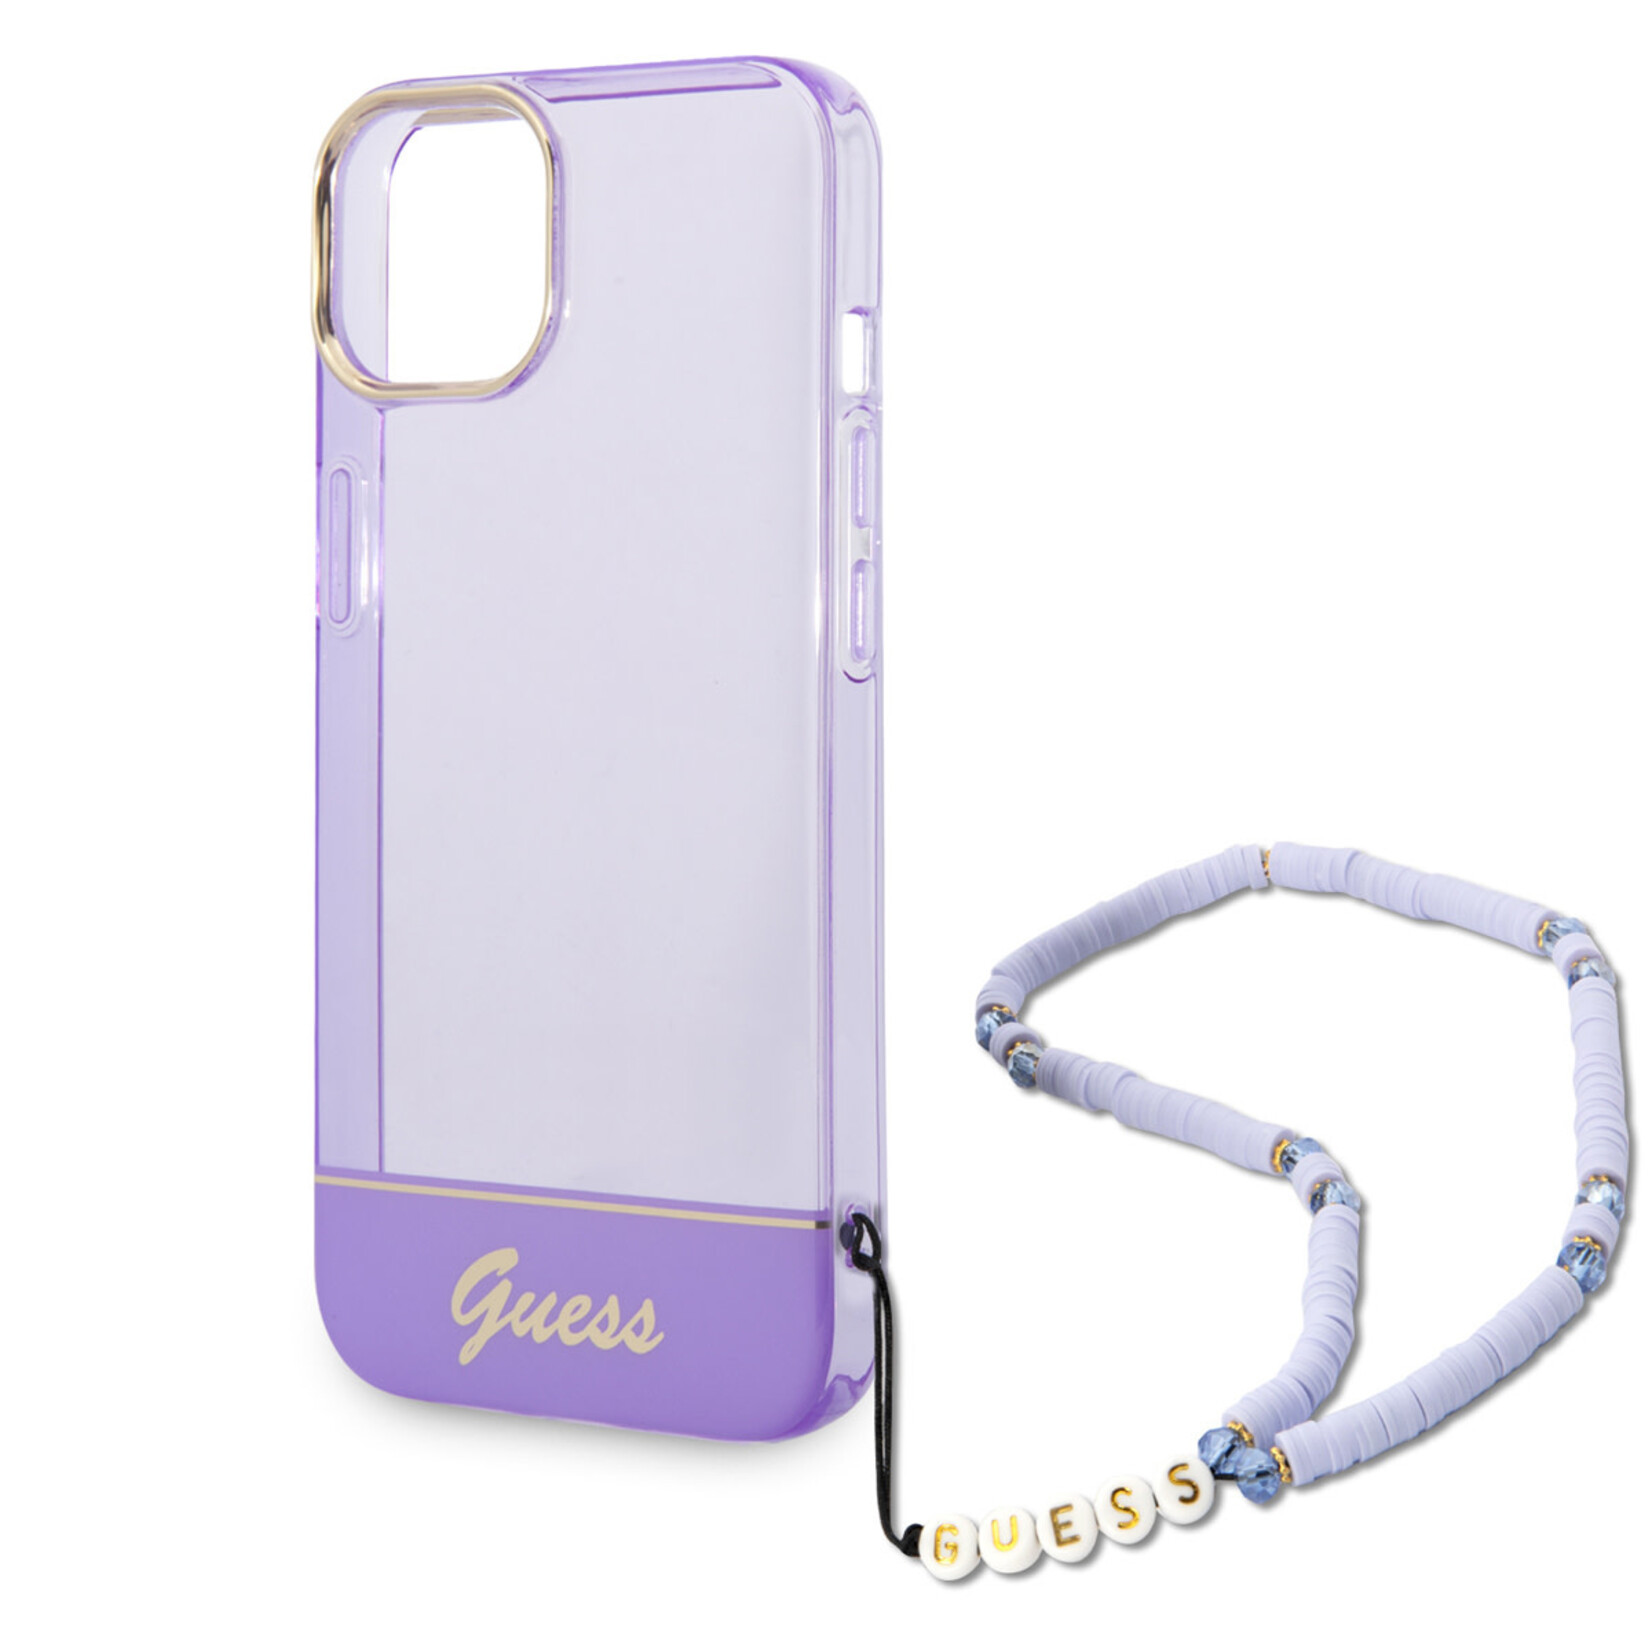 Guess Guess Transparante Paarse TPU Back Cover Telefoonhoesje voor Apple iPhone 14 - Bescherming & Stijl